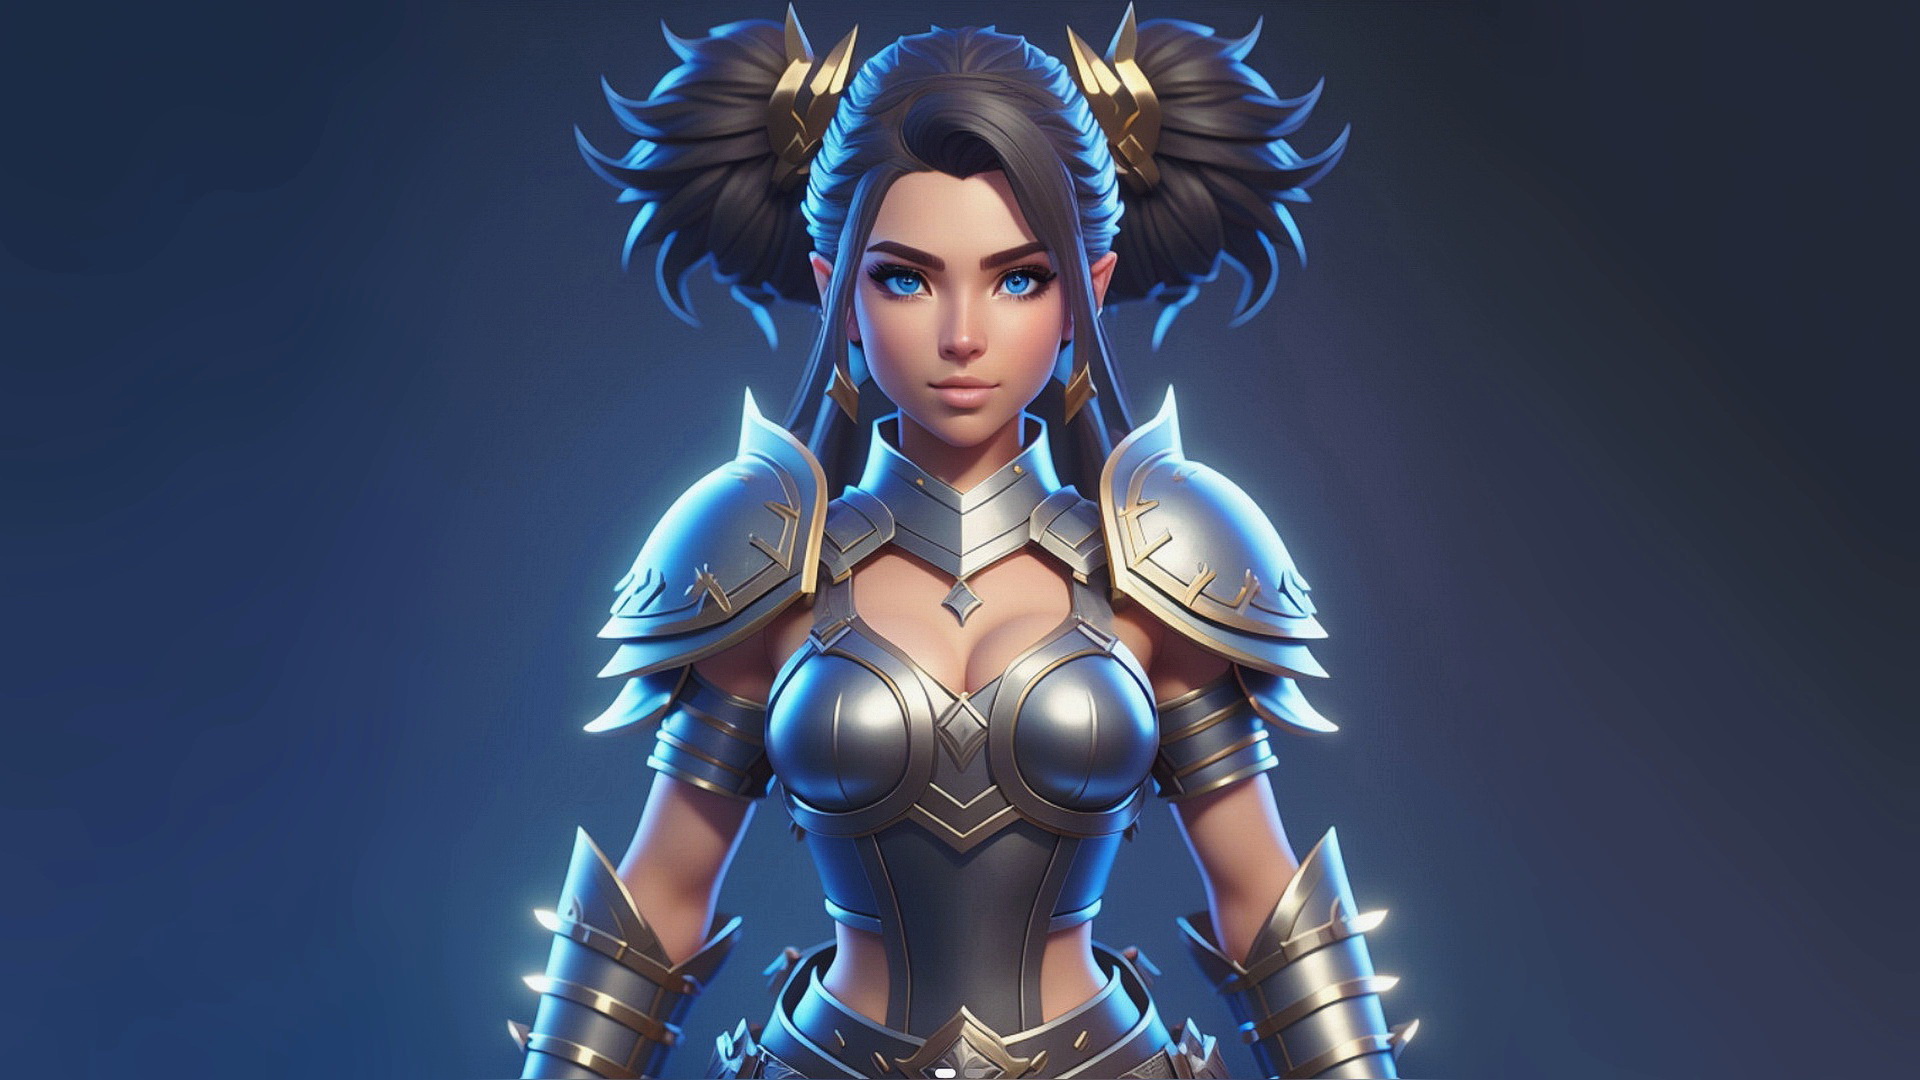 Free photo Drawing of a girl warrior standing in armor on a blue background